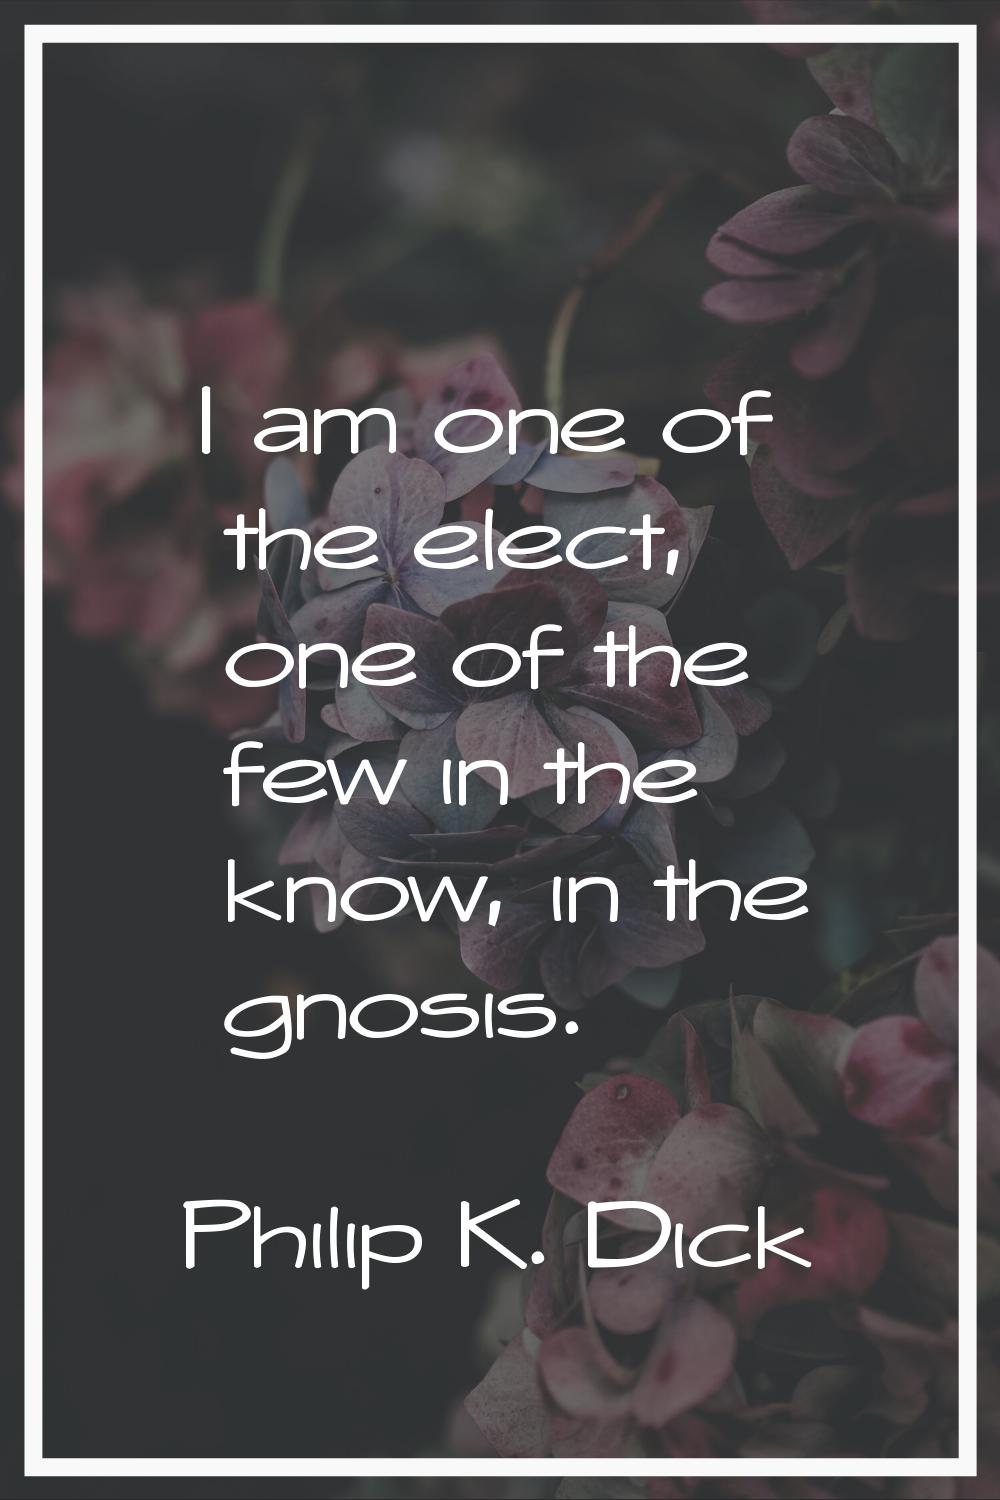 I am one of the elect, one of the few in the know, in the gnosis.